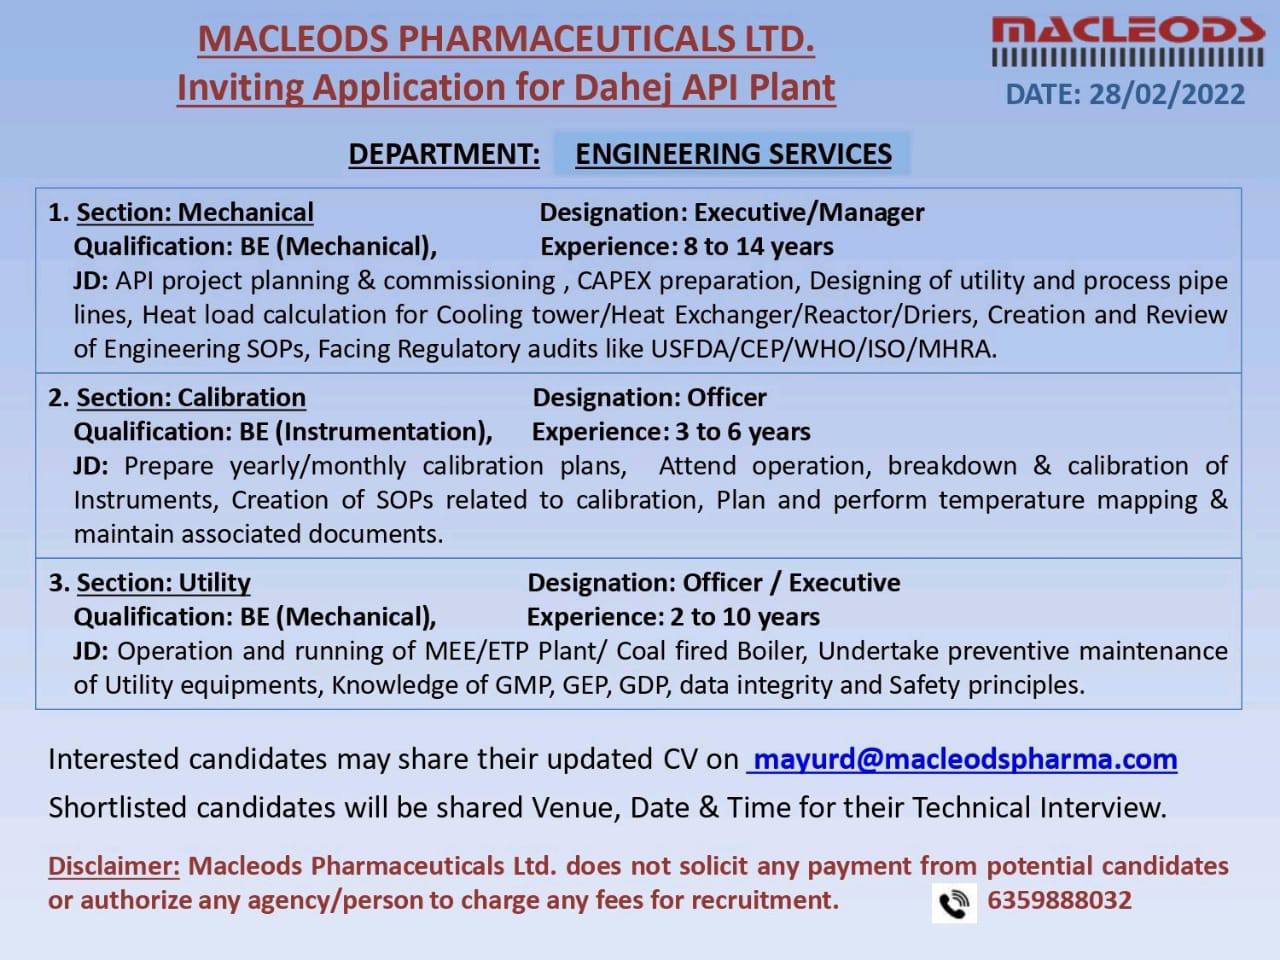 Job Availables,Macleods Pharmaceuticals Ltd. Job Vacancy For BE Mechanical/ BE Instrumentation